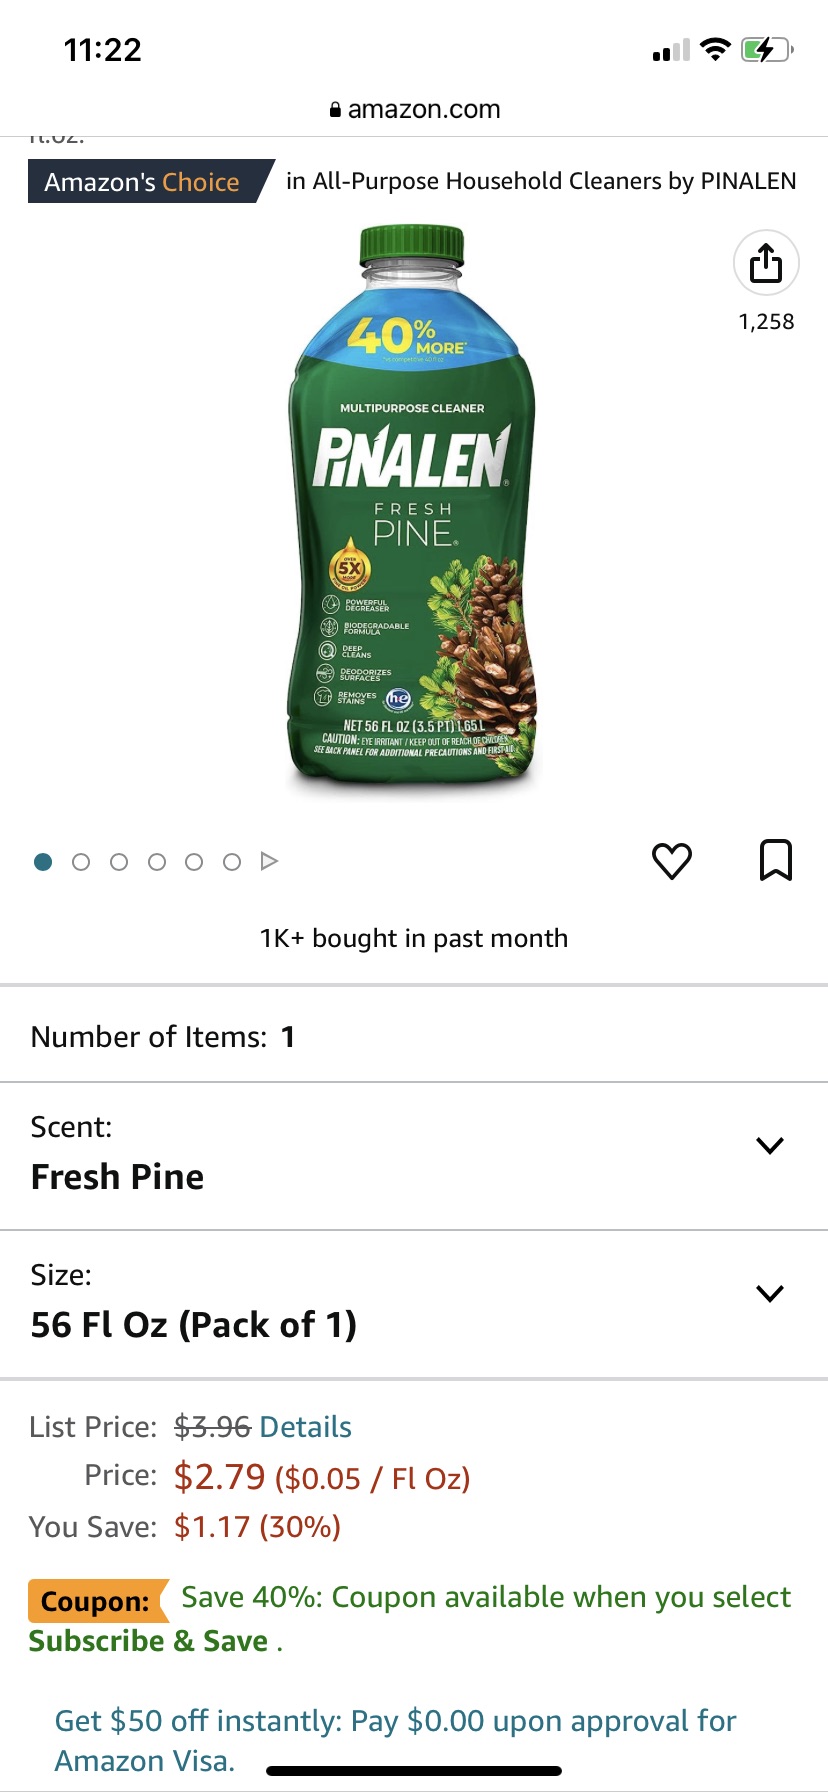 Amazon.com: PINALEN Original Fresh Pine Multipurpose Cleaner, Kitchen, Floor, Bathroom and Surface Cleaning Product for Home, 56 fl.oz. : 家用多用途清洁剂 续订